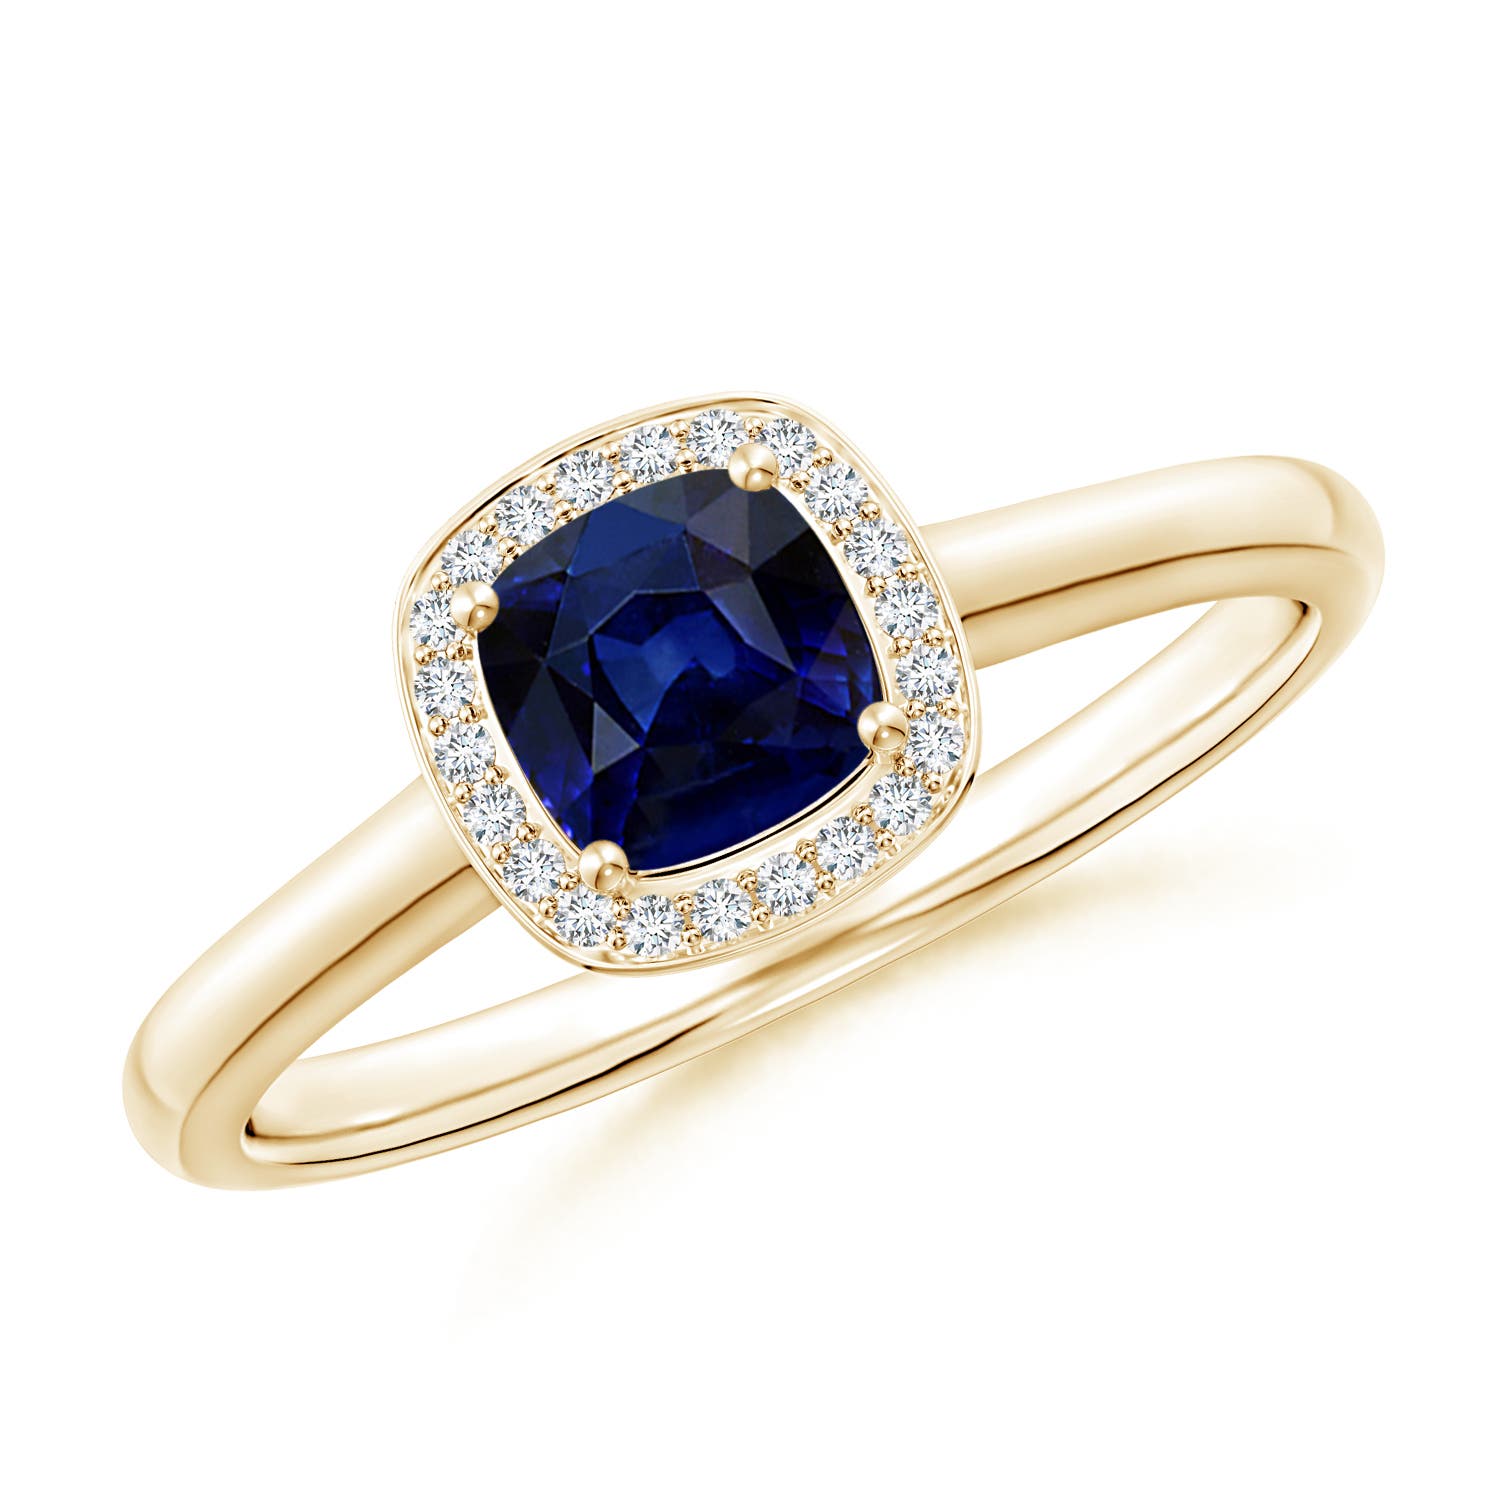 AAA - Blue Sapphire / 0.42 CT / 14 KT Yellow Gold